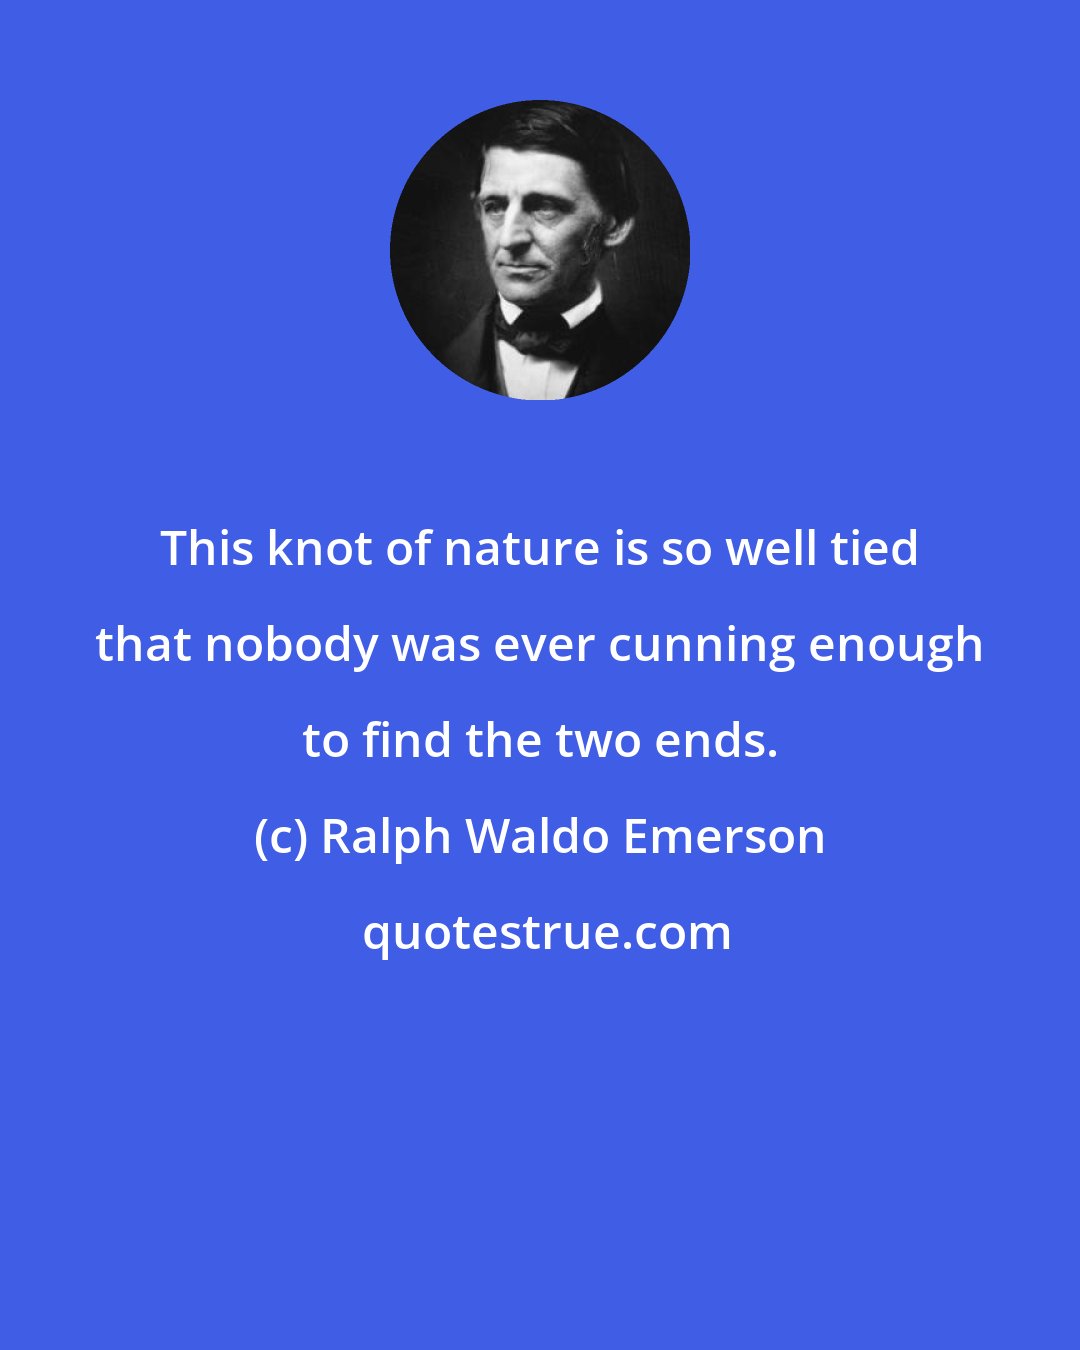 Ralph Waldo Emerson: This knot of nature is so well tied that nobody was ever cunning enough to find the two ends.